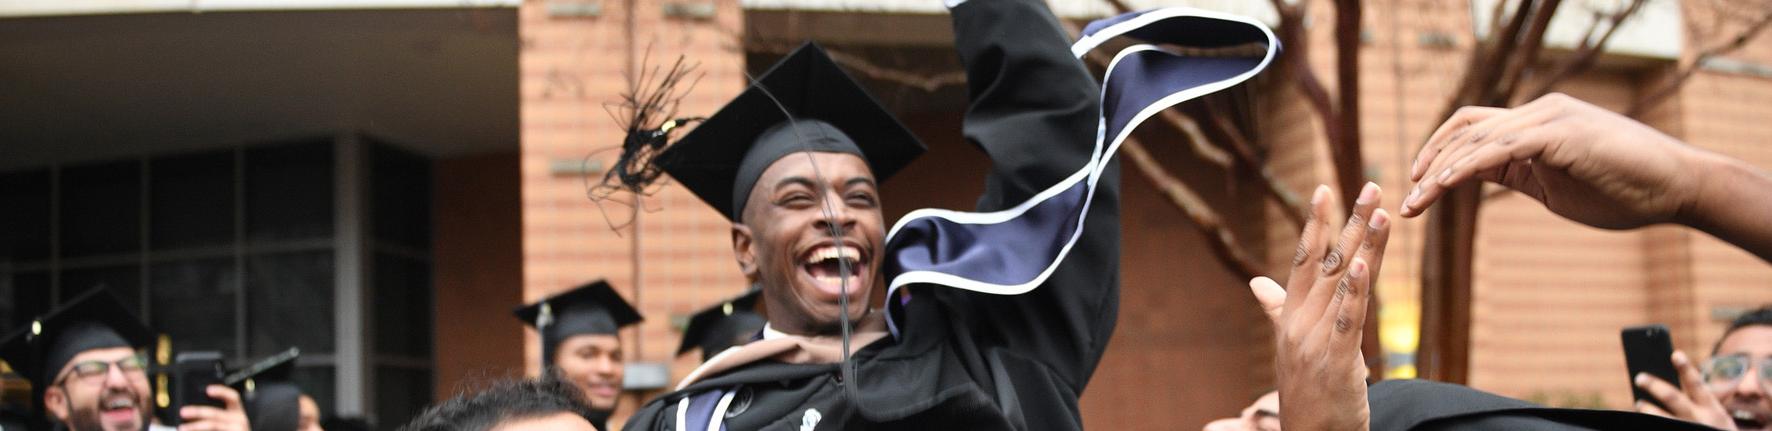 Graduate laughs as he is lifted up by his fellow graduates